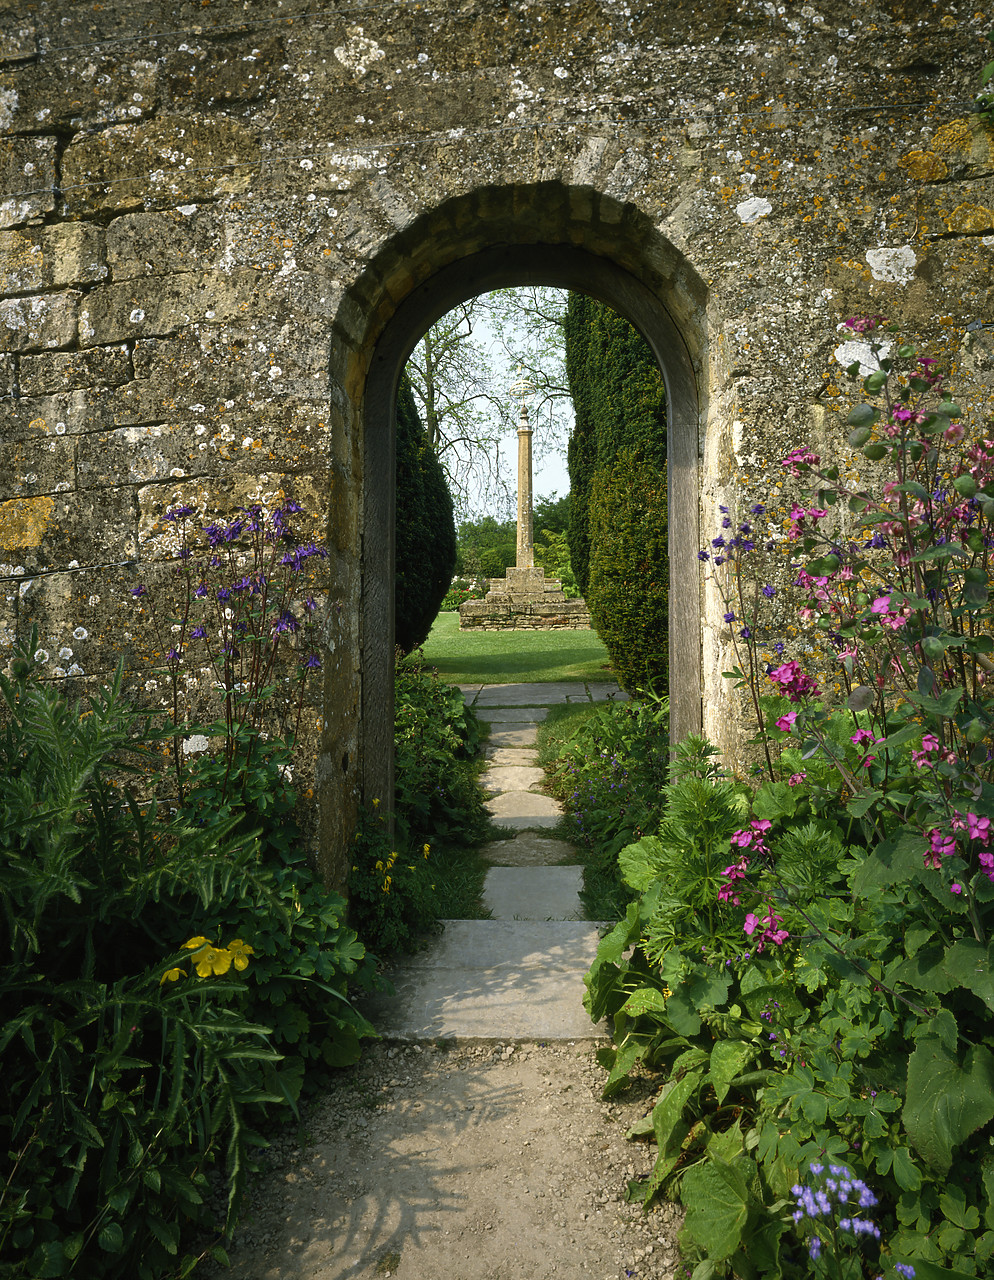 #924003-2 - Garden Archway at Snowshill Manor, Gloucestershire, England